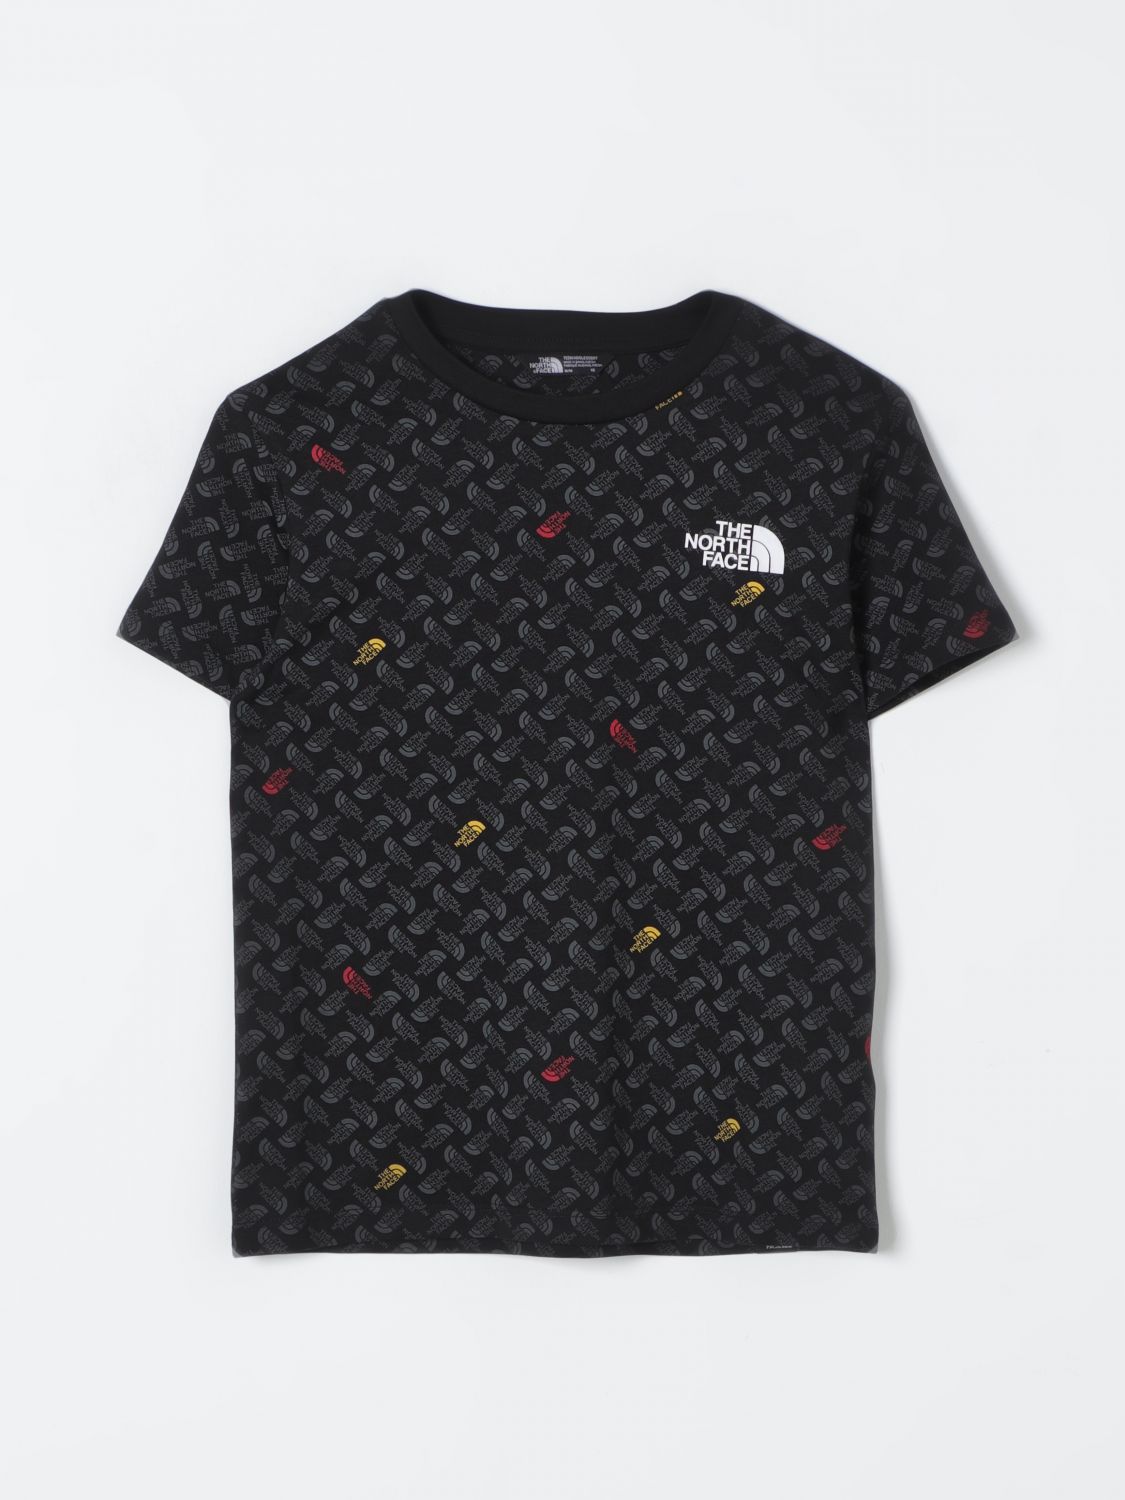 The North Face T-Shirt THE NORTH FACE Kids color Black